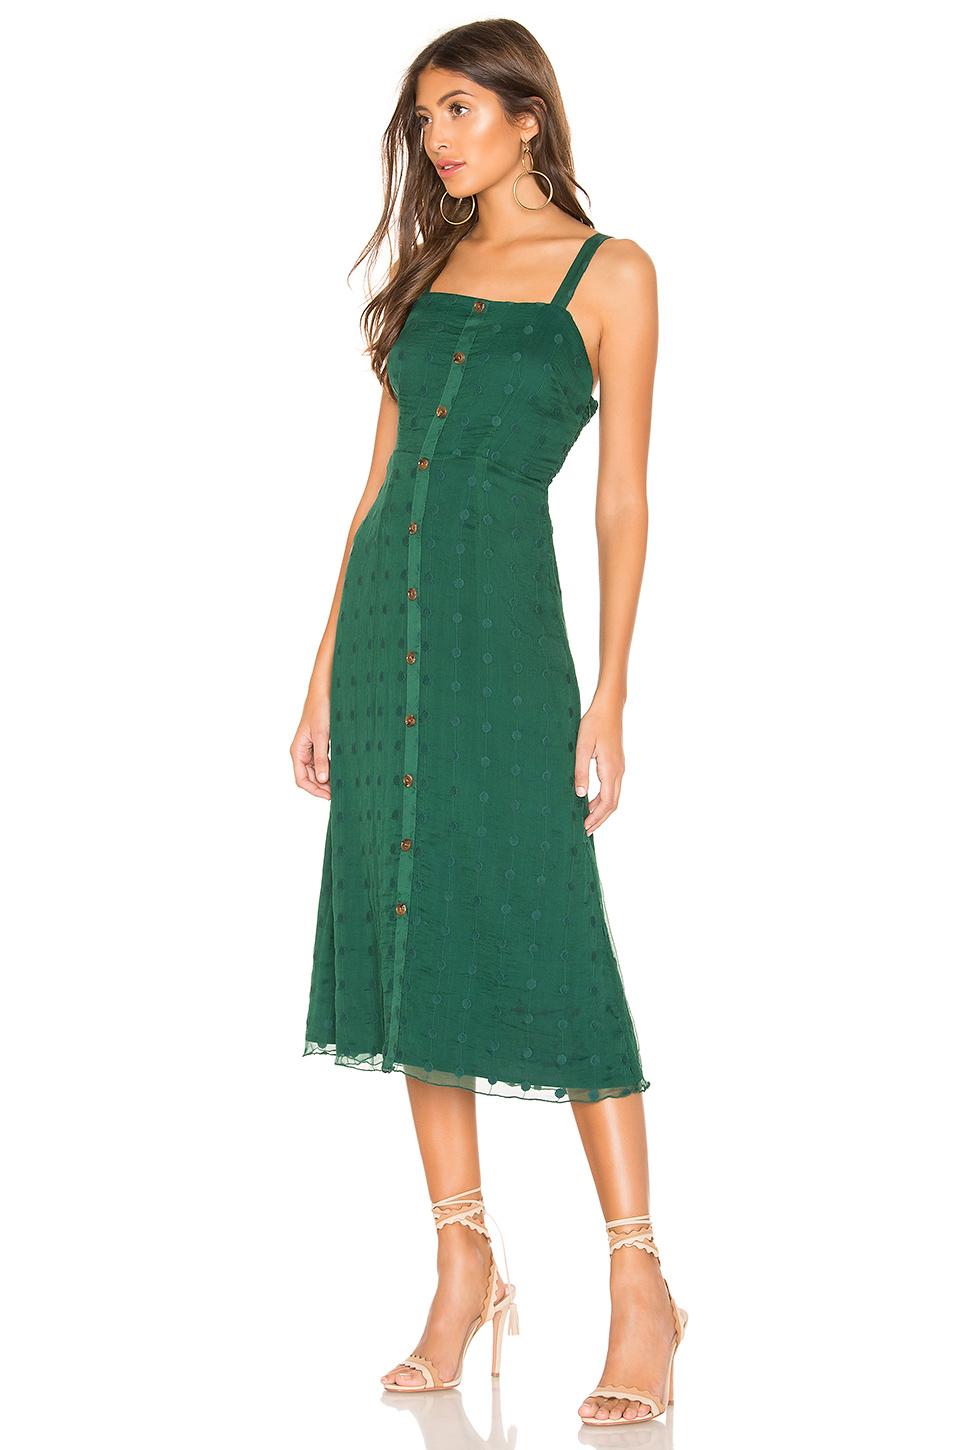 House of Harlow 1960 Synthetic X Revolve Marla Midi Dress in Green - Lyst